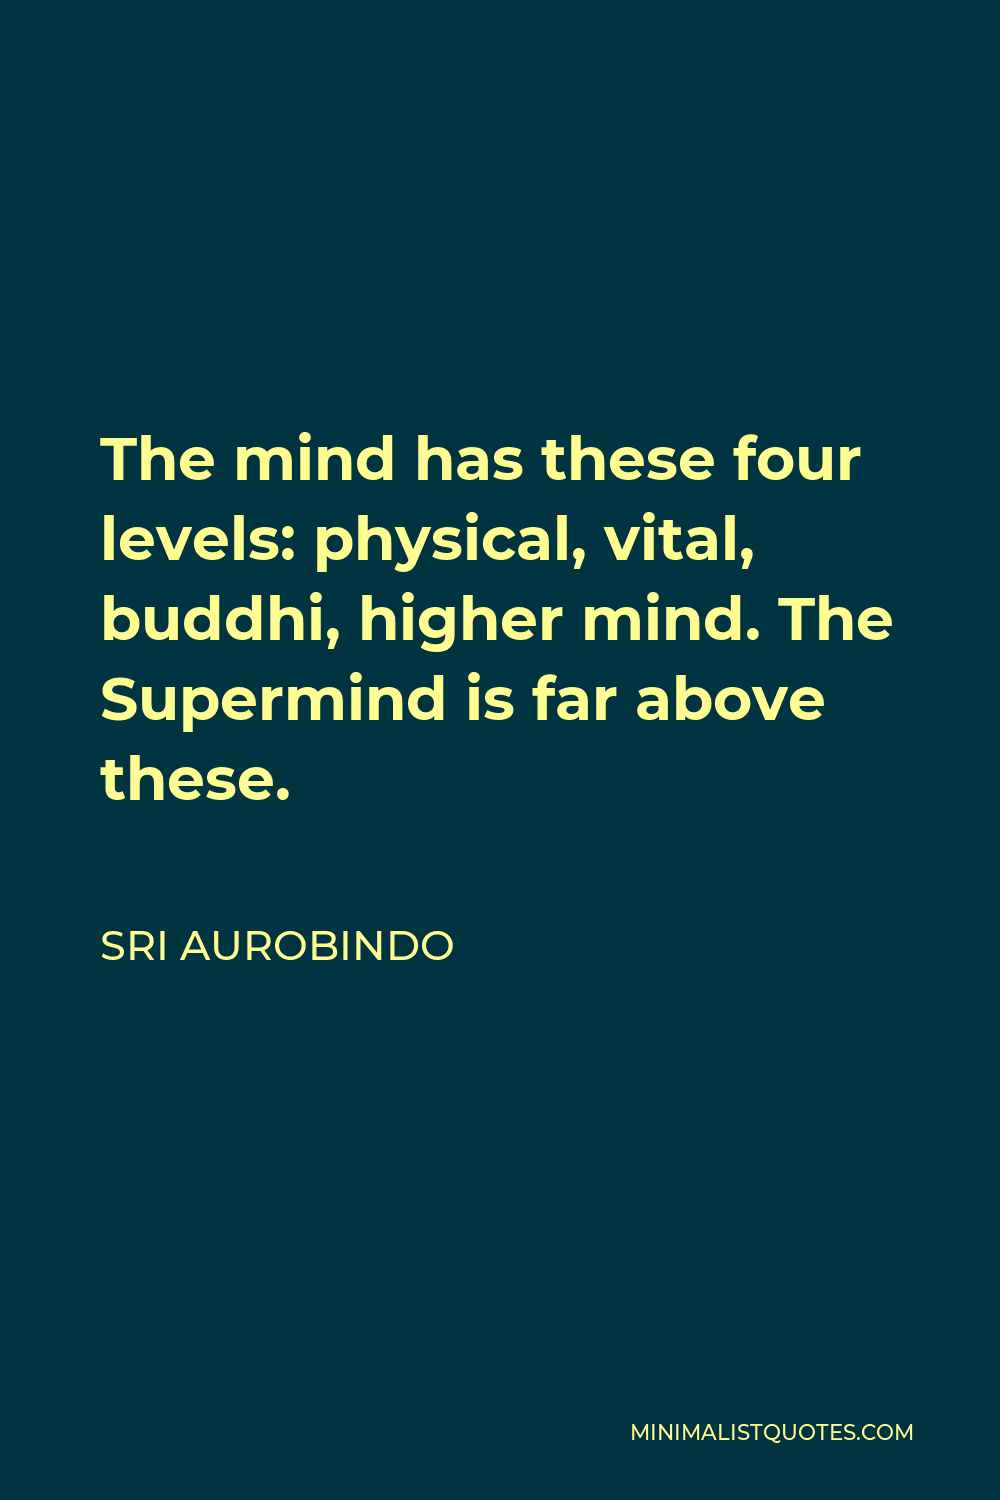 Sri Aurobindo Quote - The mind has these four levels: physical, vital, buddhi, higher mind. The Supermind is far above these.